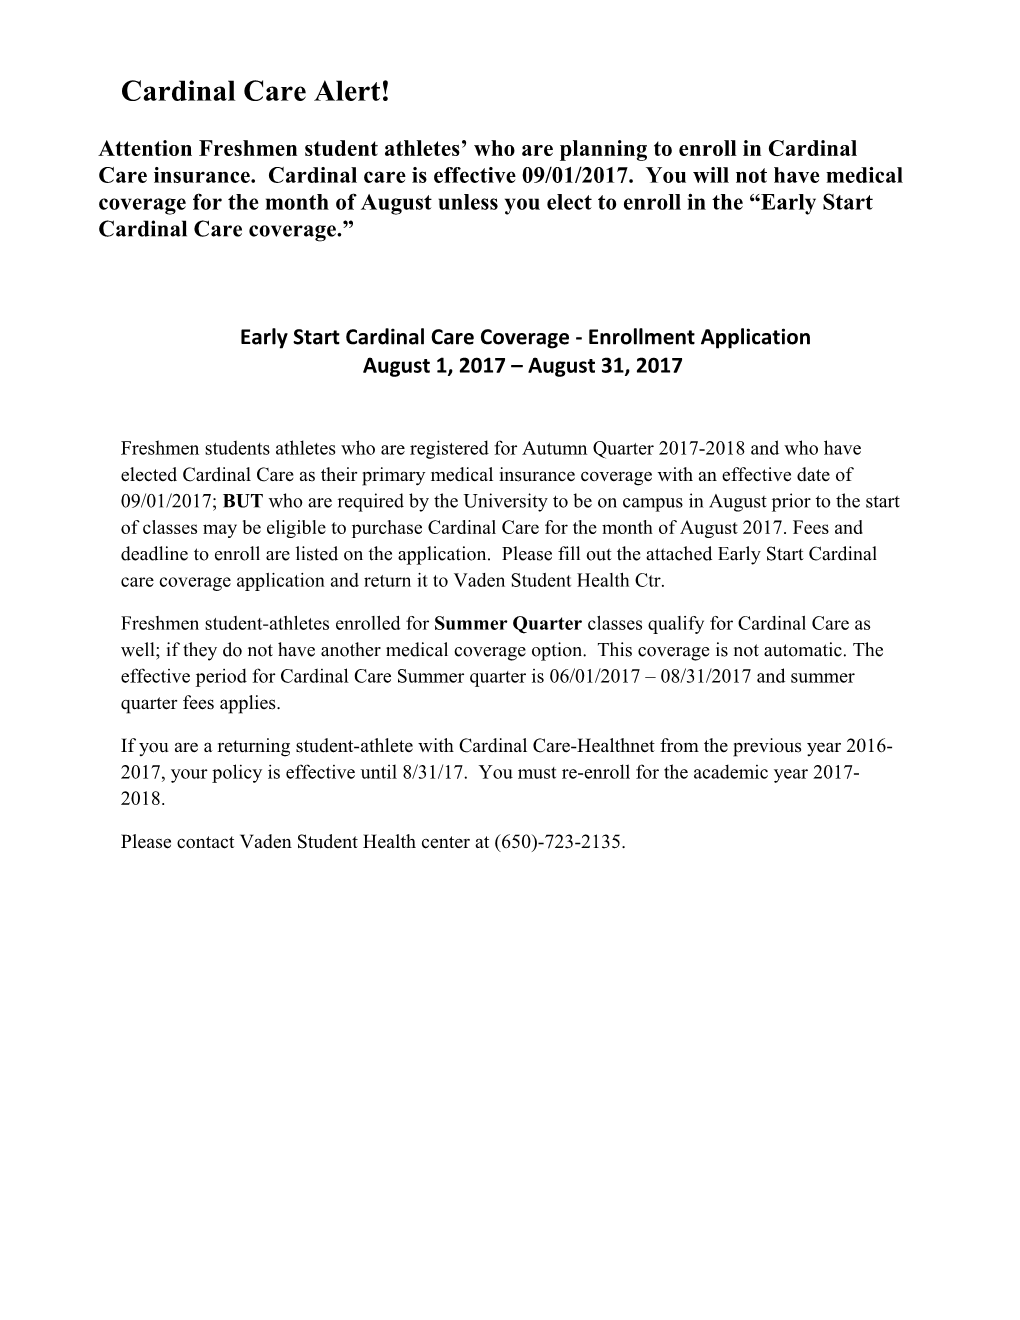 Early Start Cardinal Care Coverage - Enrollment Application